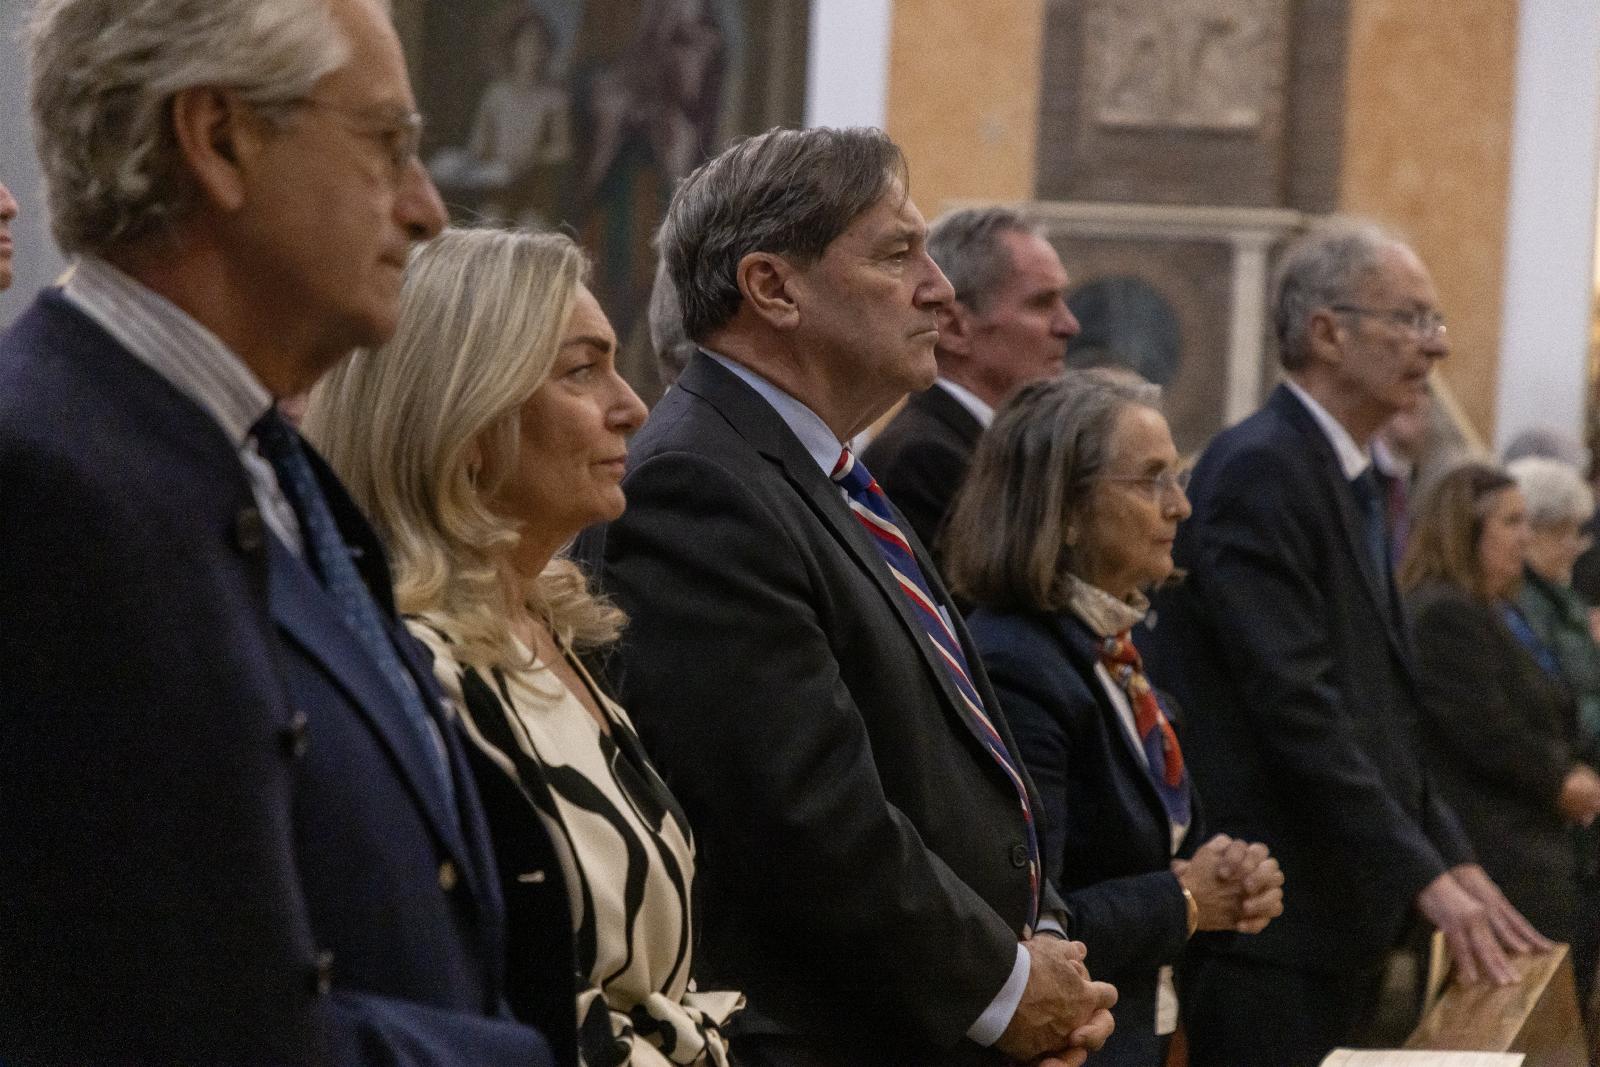 Joe Donnelly, U.S. ambassador to the Holy See, attends Mass.